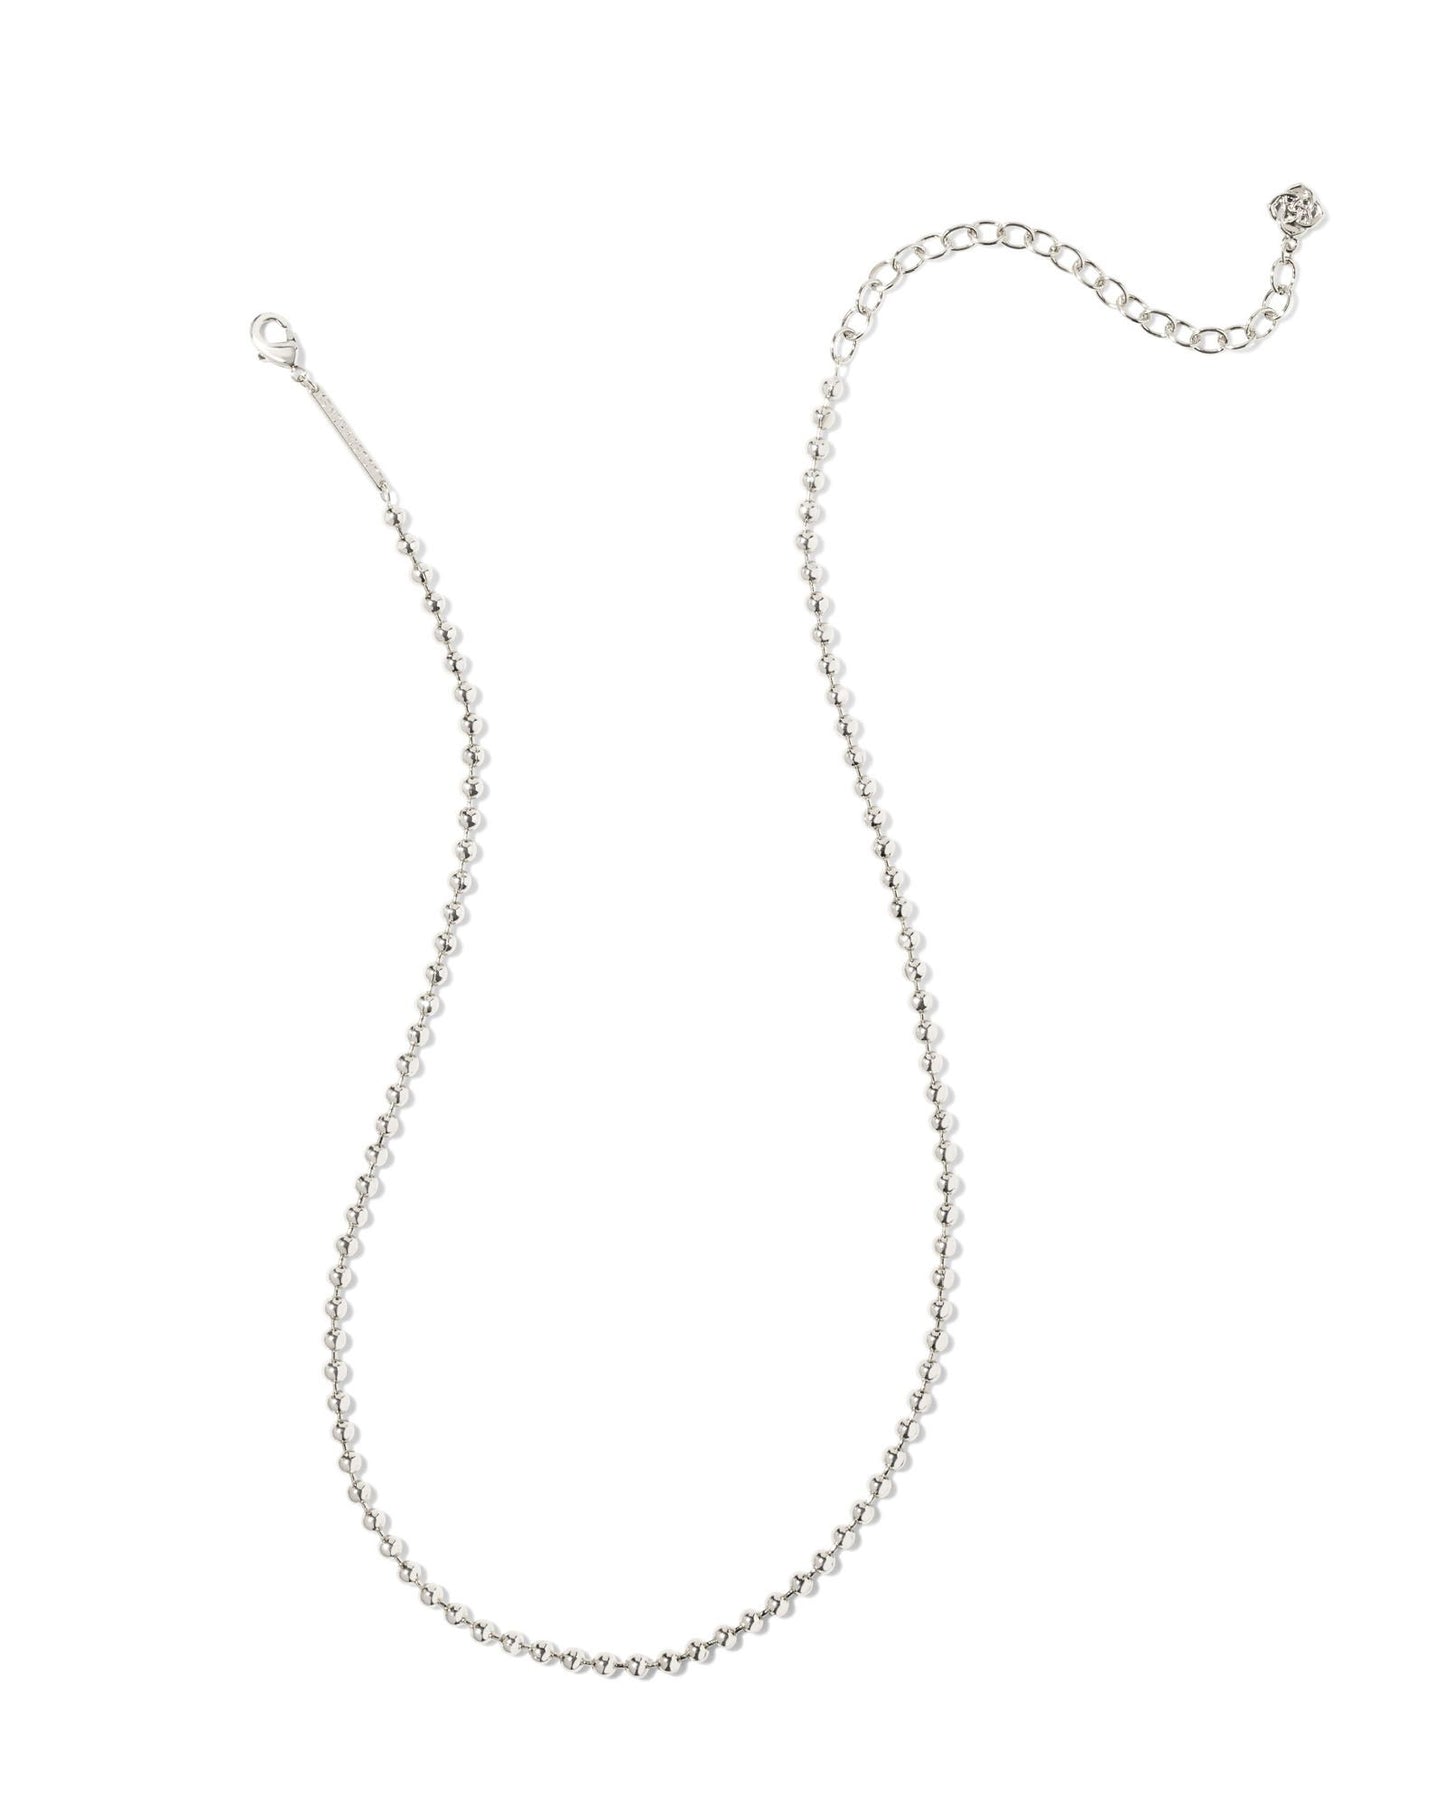 Kendra Scott Oliver Chain Necklace (gold or silver)